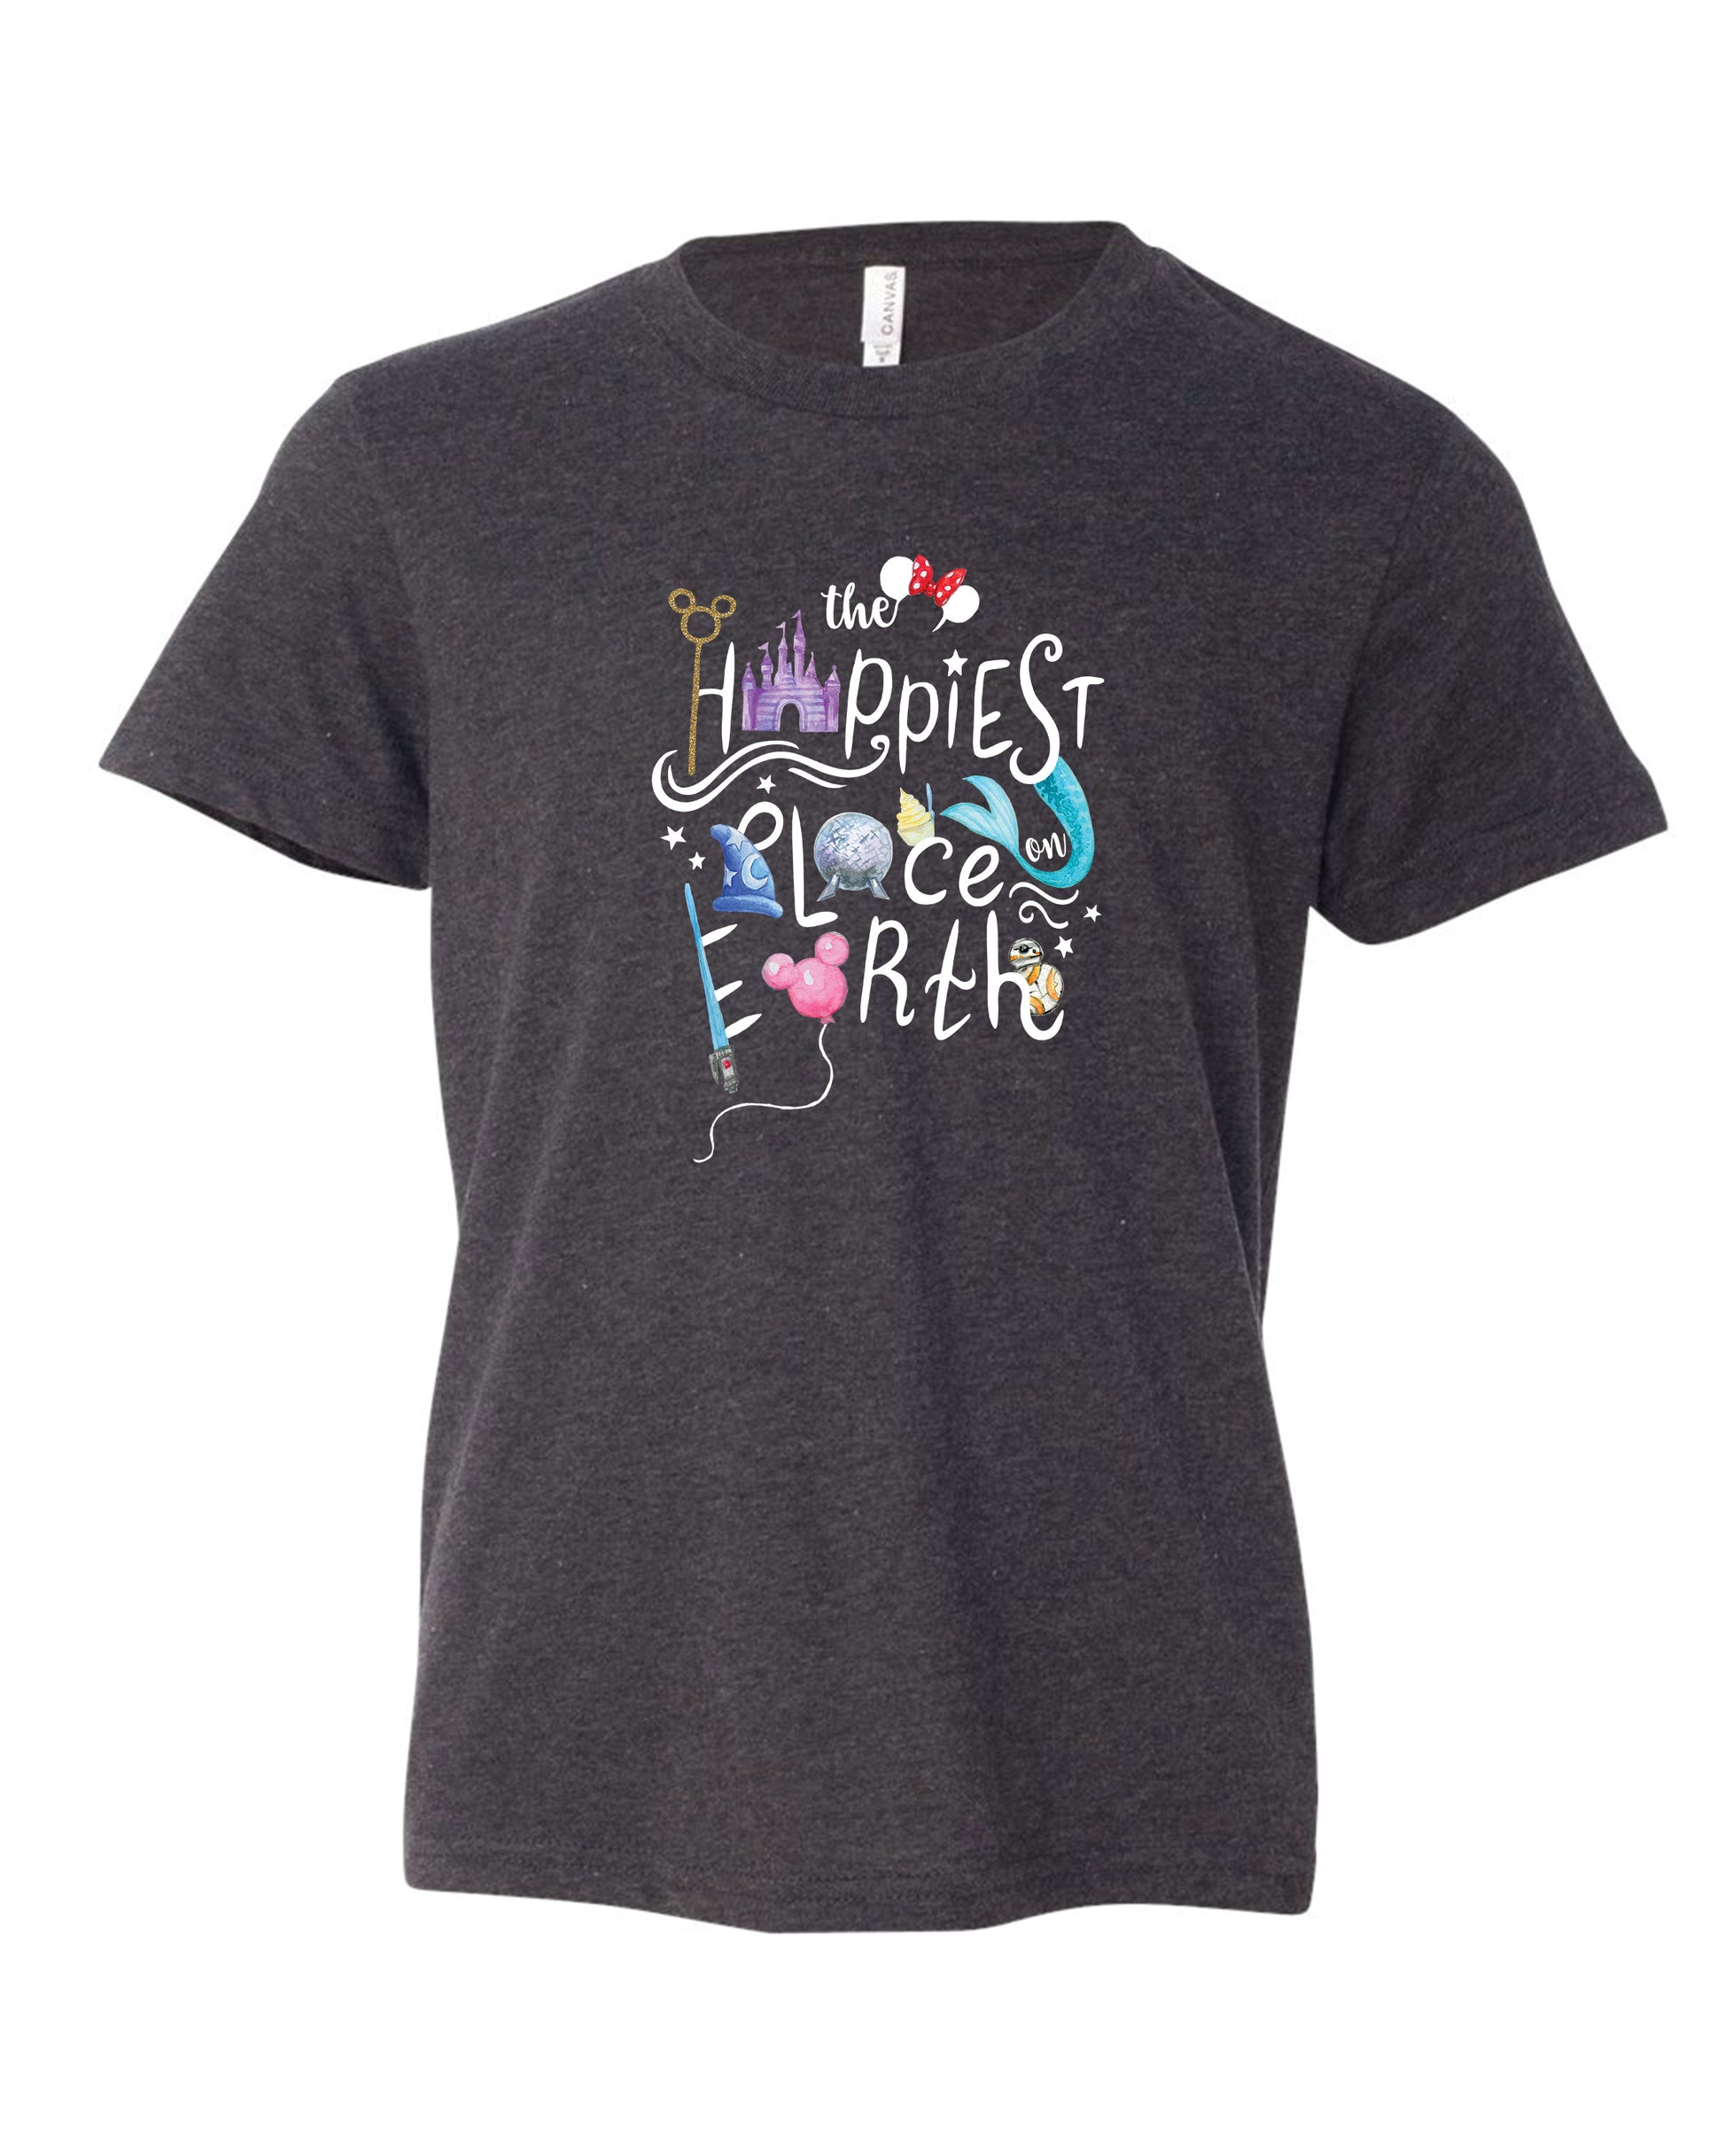 Happiest Mom on Earth | Tee | Adult-Shirt Shop-Sister Shirts, Cute & Custom Tees for Mama & Littles in Trussville, Alabama.